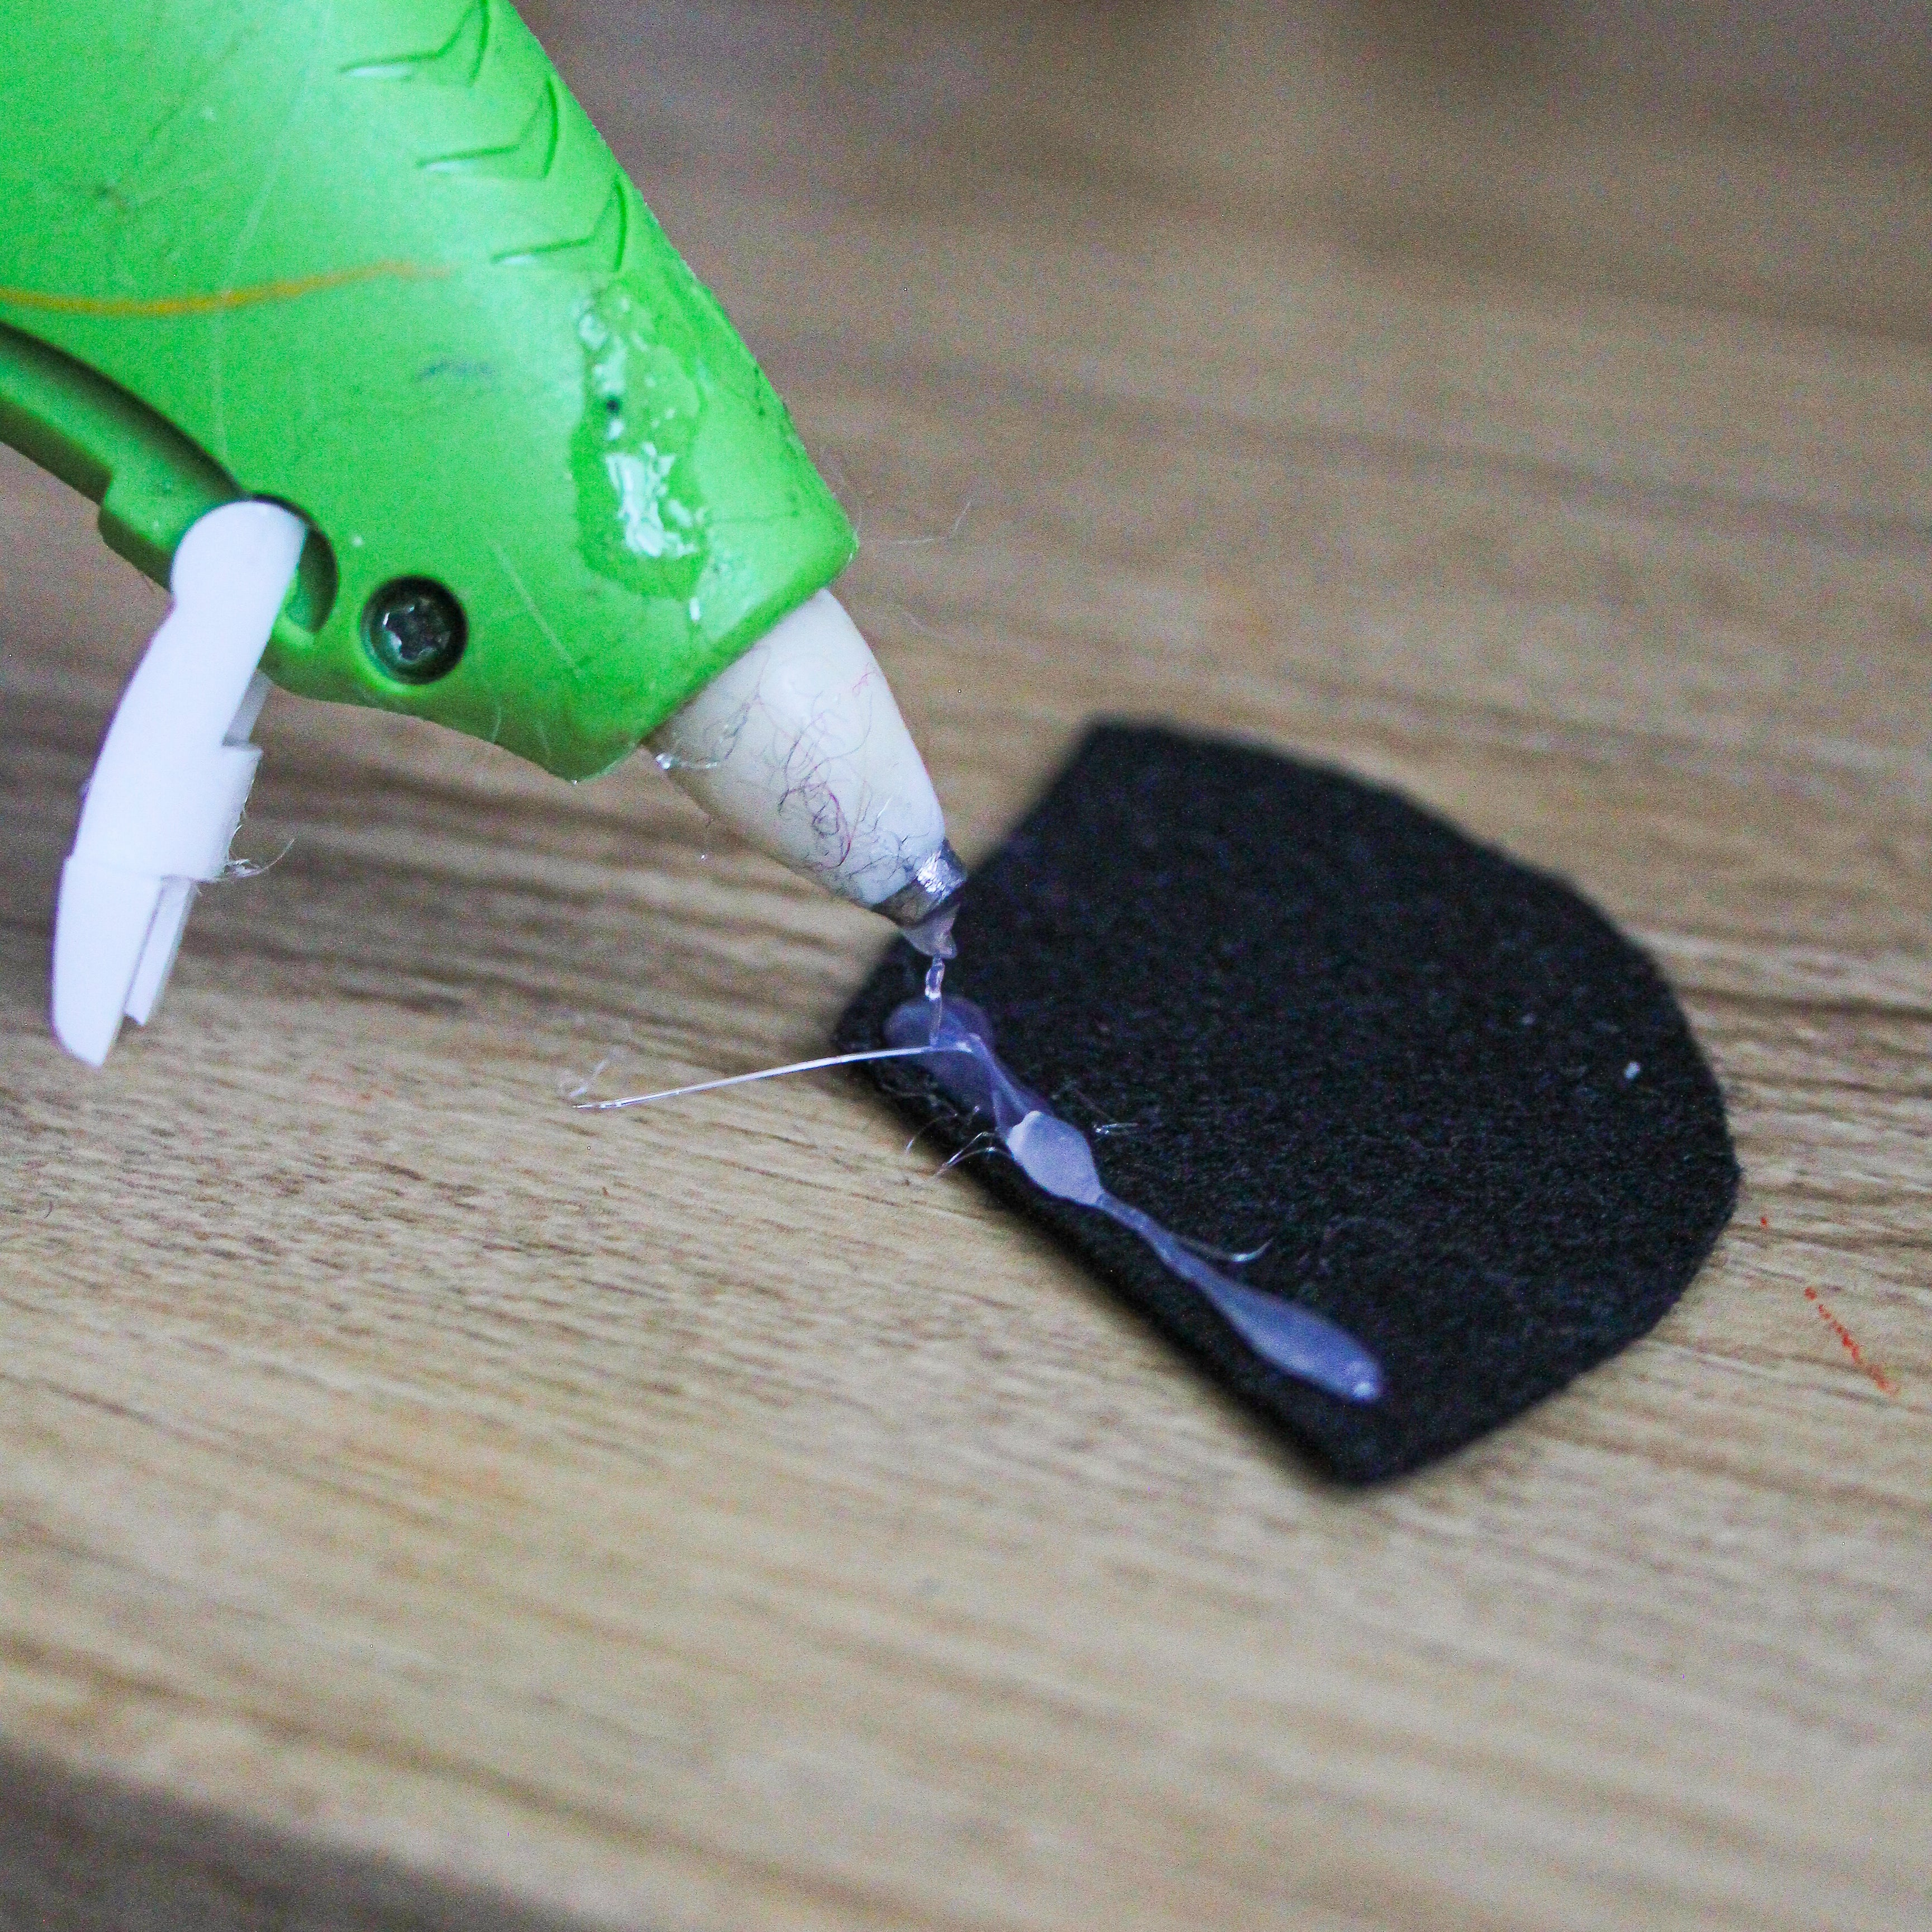 Hot glue is being placed on a felt piece.